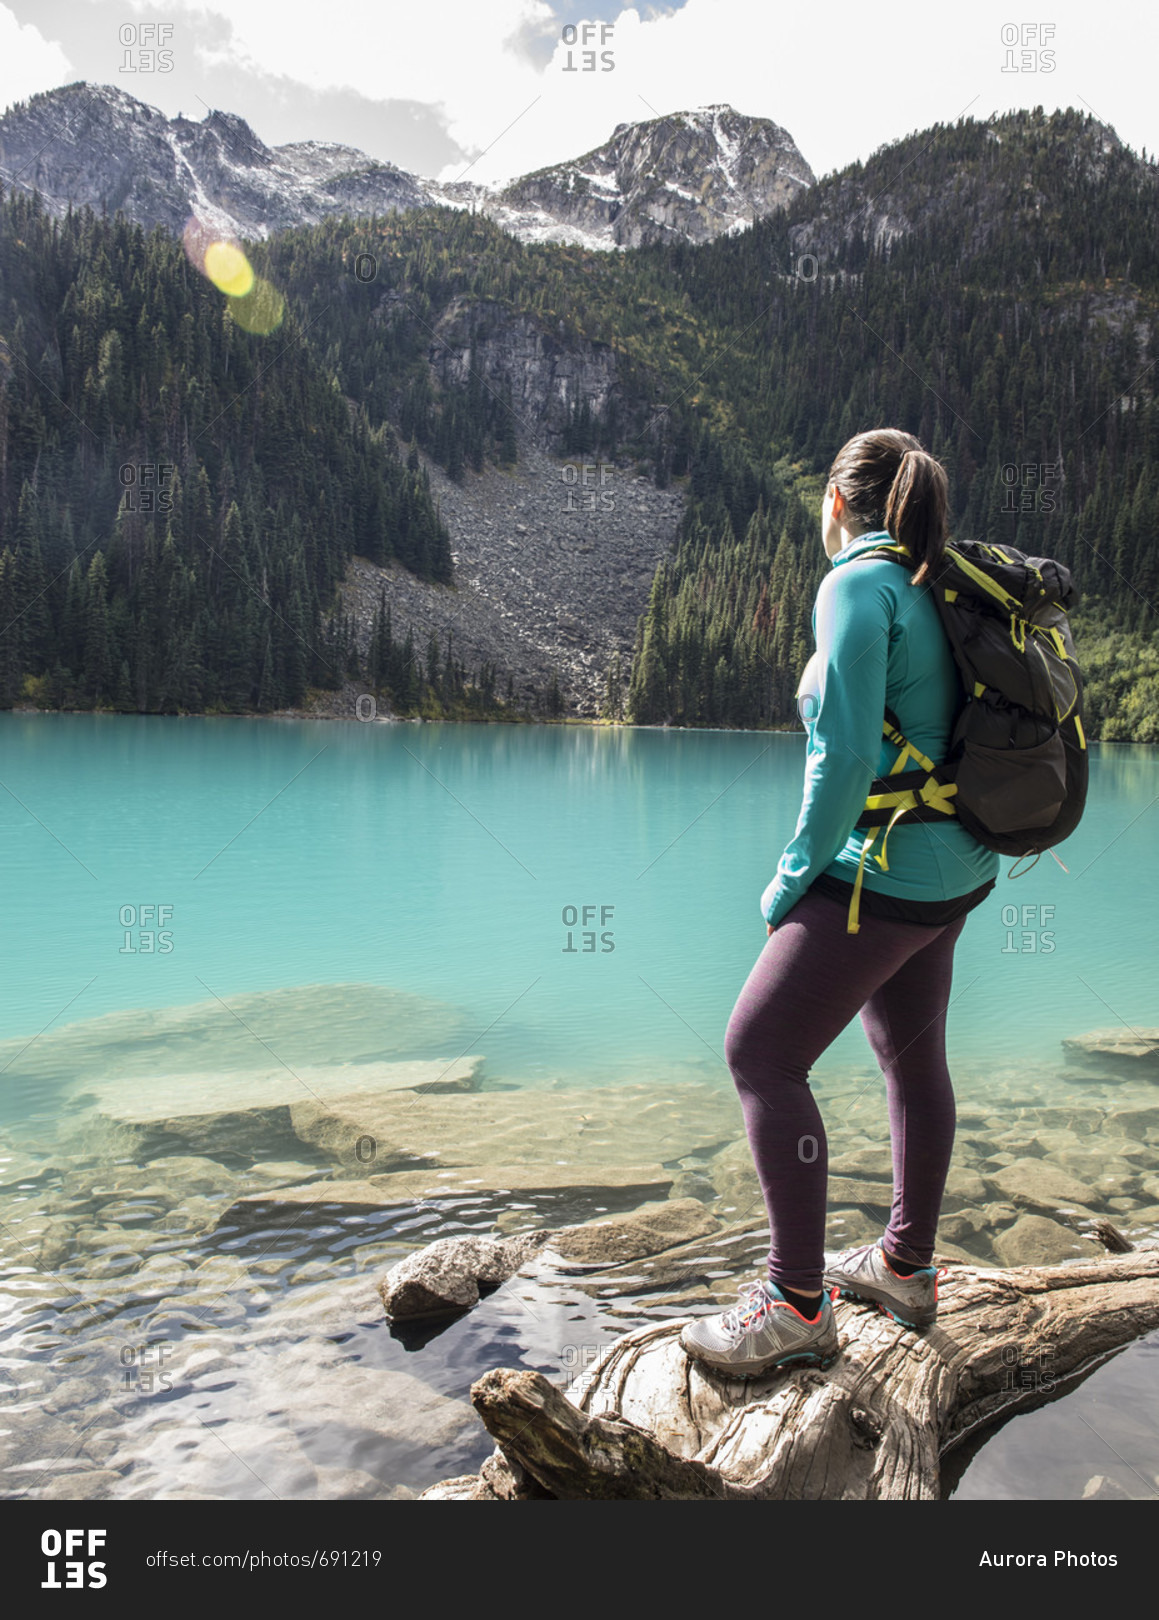 A women stands on a fallen tree next to Middle Joffre Lake and stares out at the surrounding peaks. The lake is a vibrant turquoise color due to glacier till. This hike is a popular one with in the Duffy Lake Provincial Park due to its stunning views and 